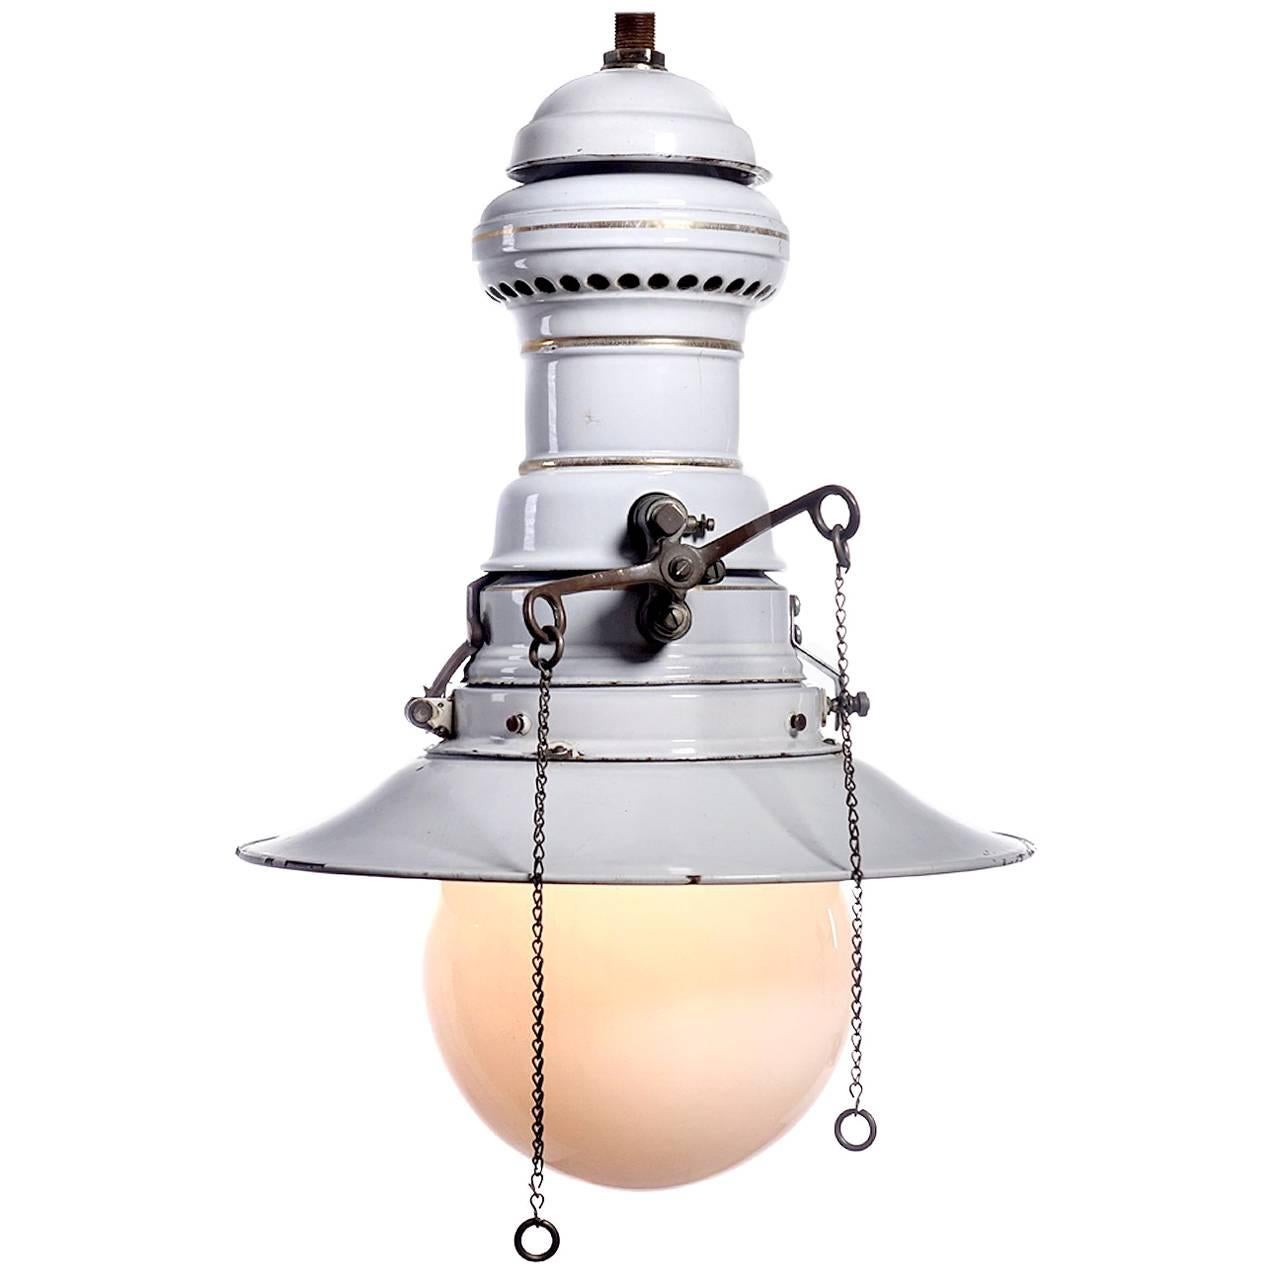 Large Early Electrified Porcelain Gas Lamp